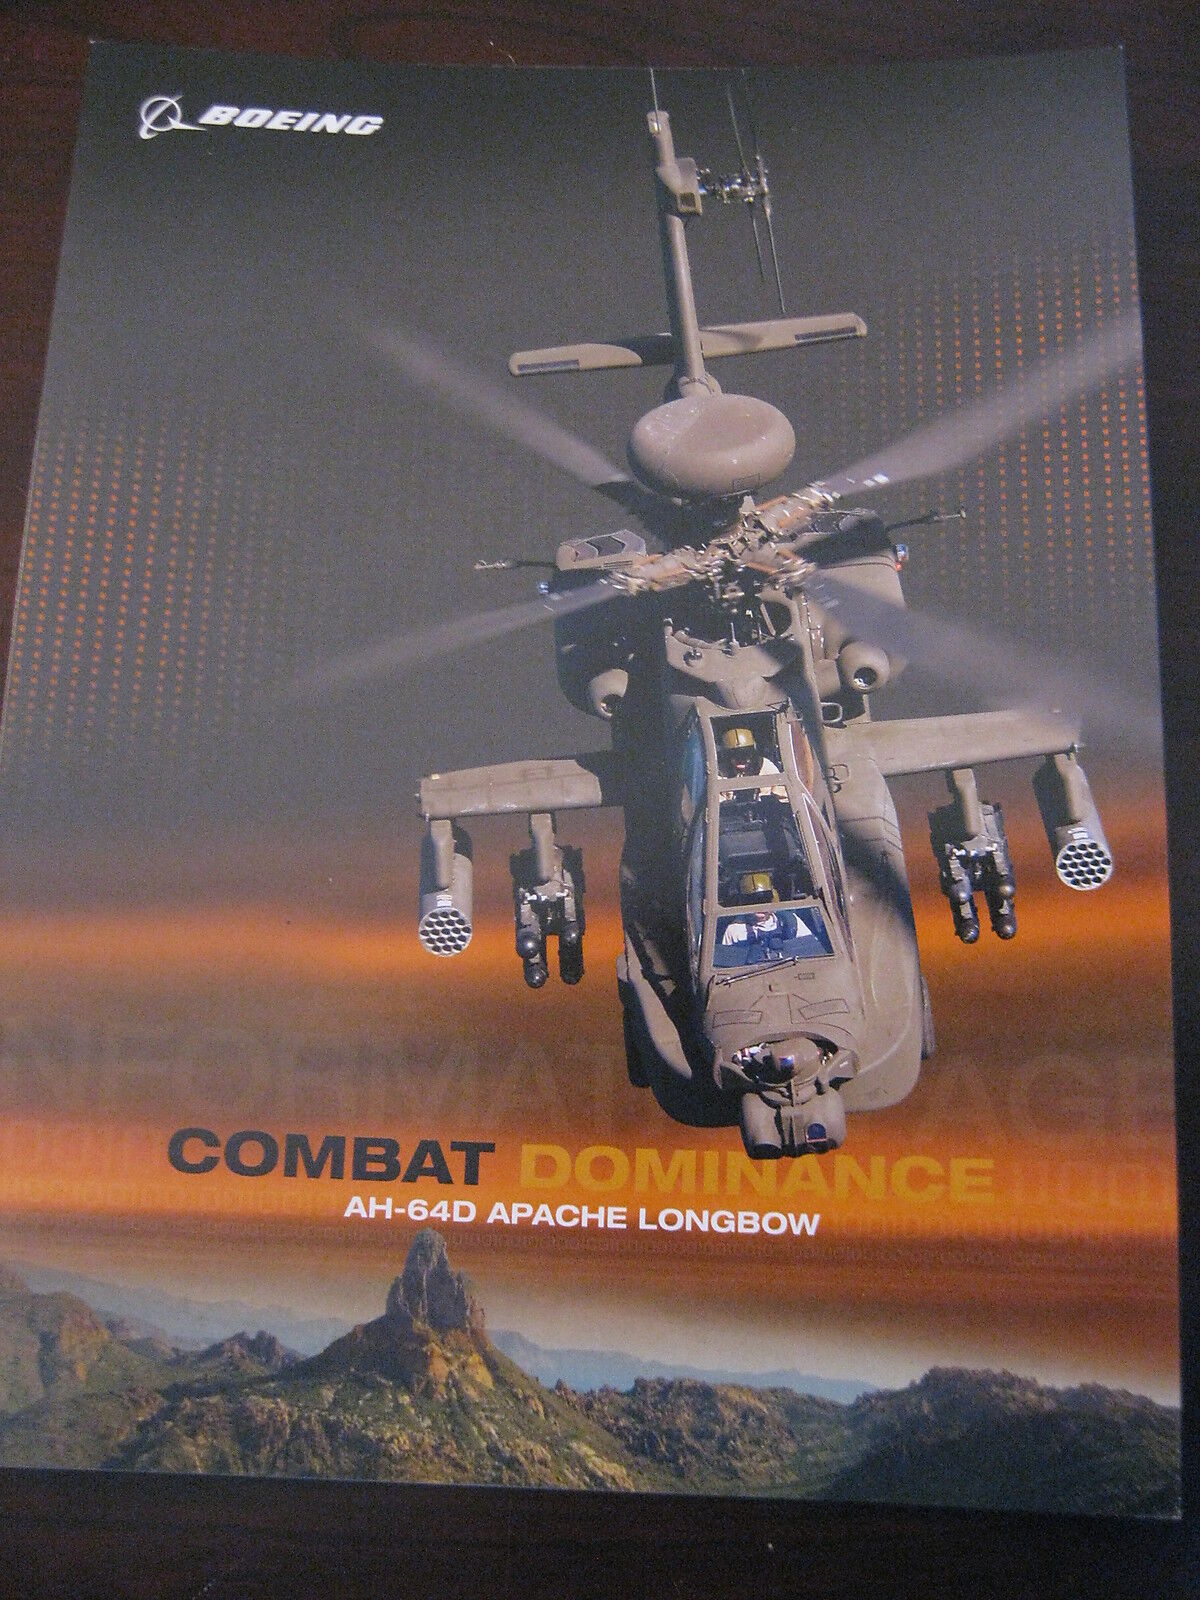 Boeing AH-64D Apache Longbow Combat Dominance Data Sheet / 4 Pages